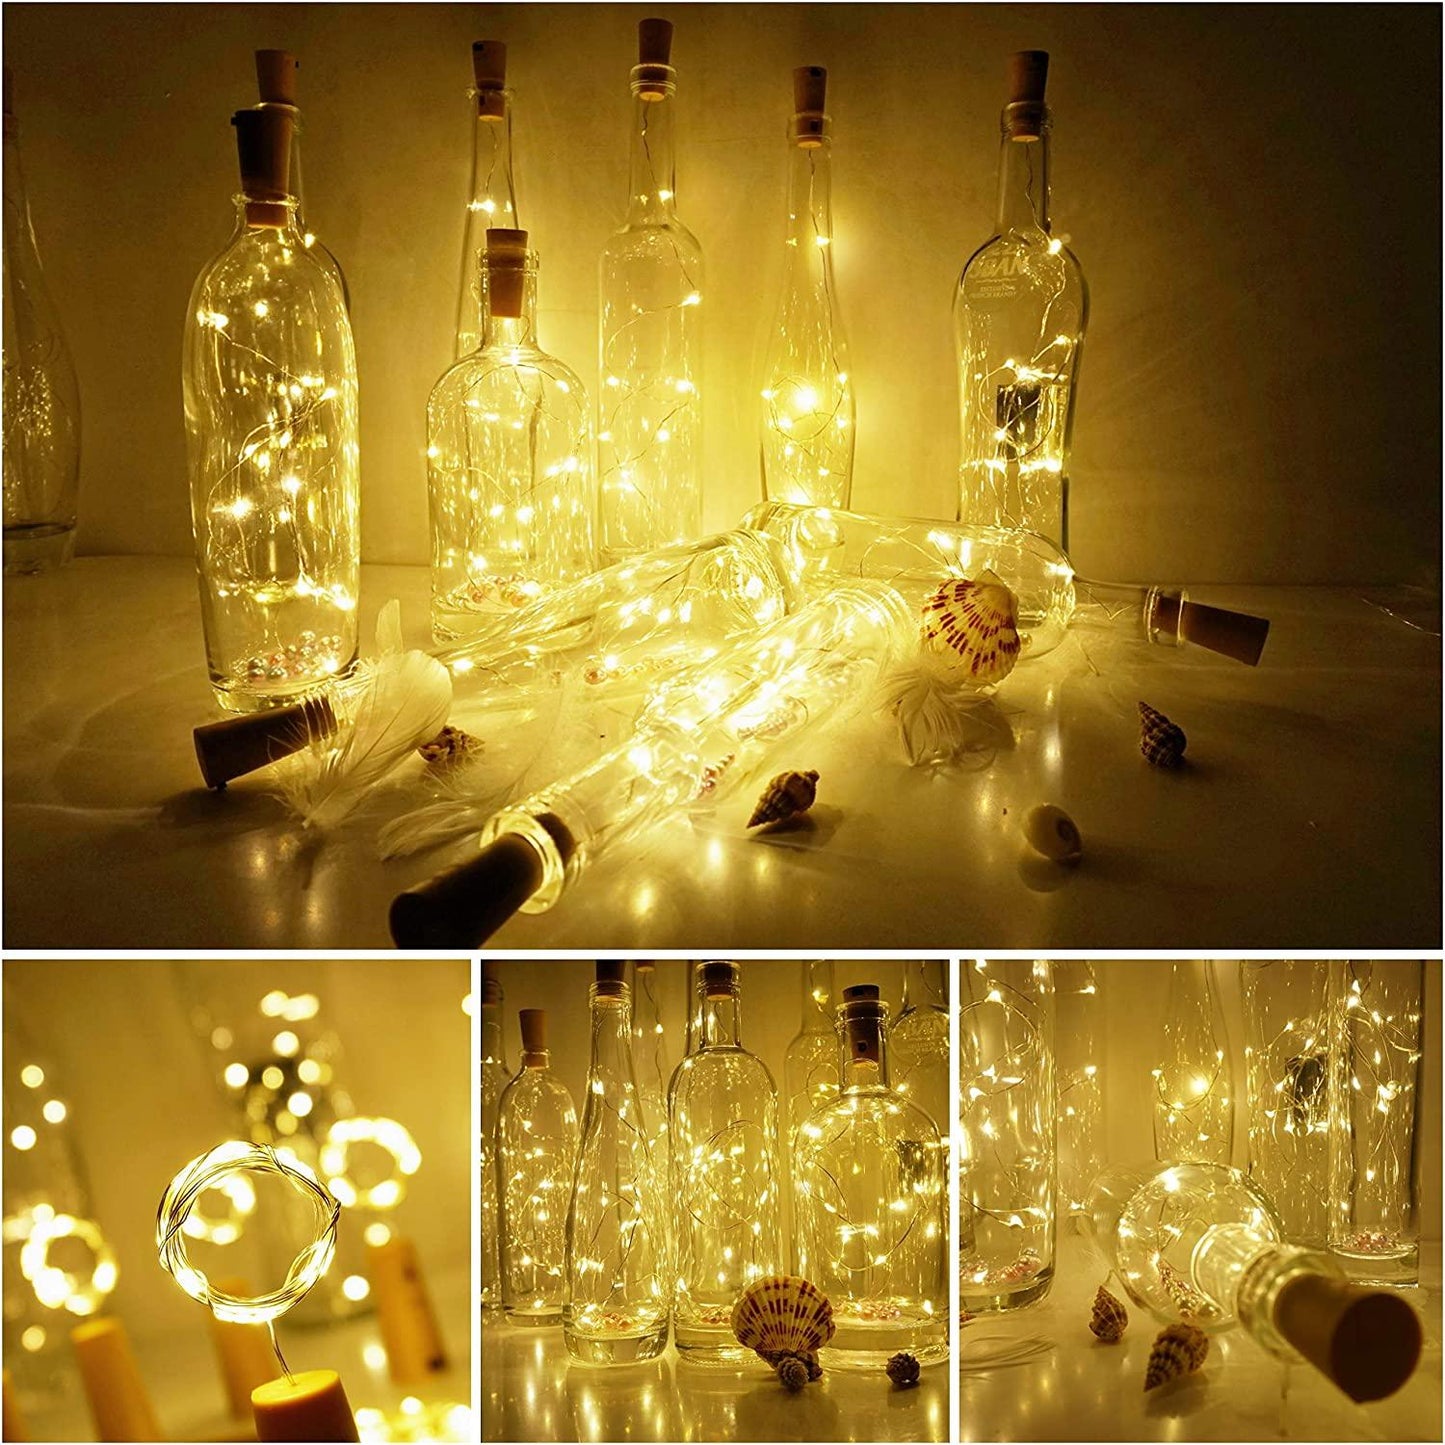 Lamp Sets Wine Bottle Lights with Cork - If you say i do